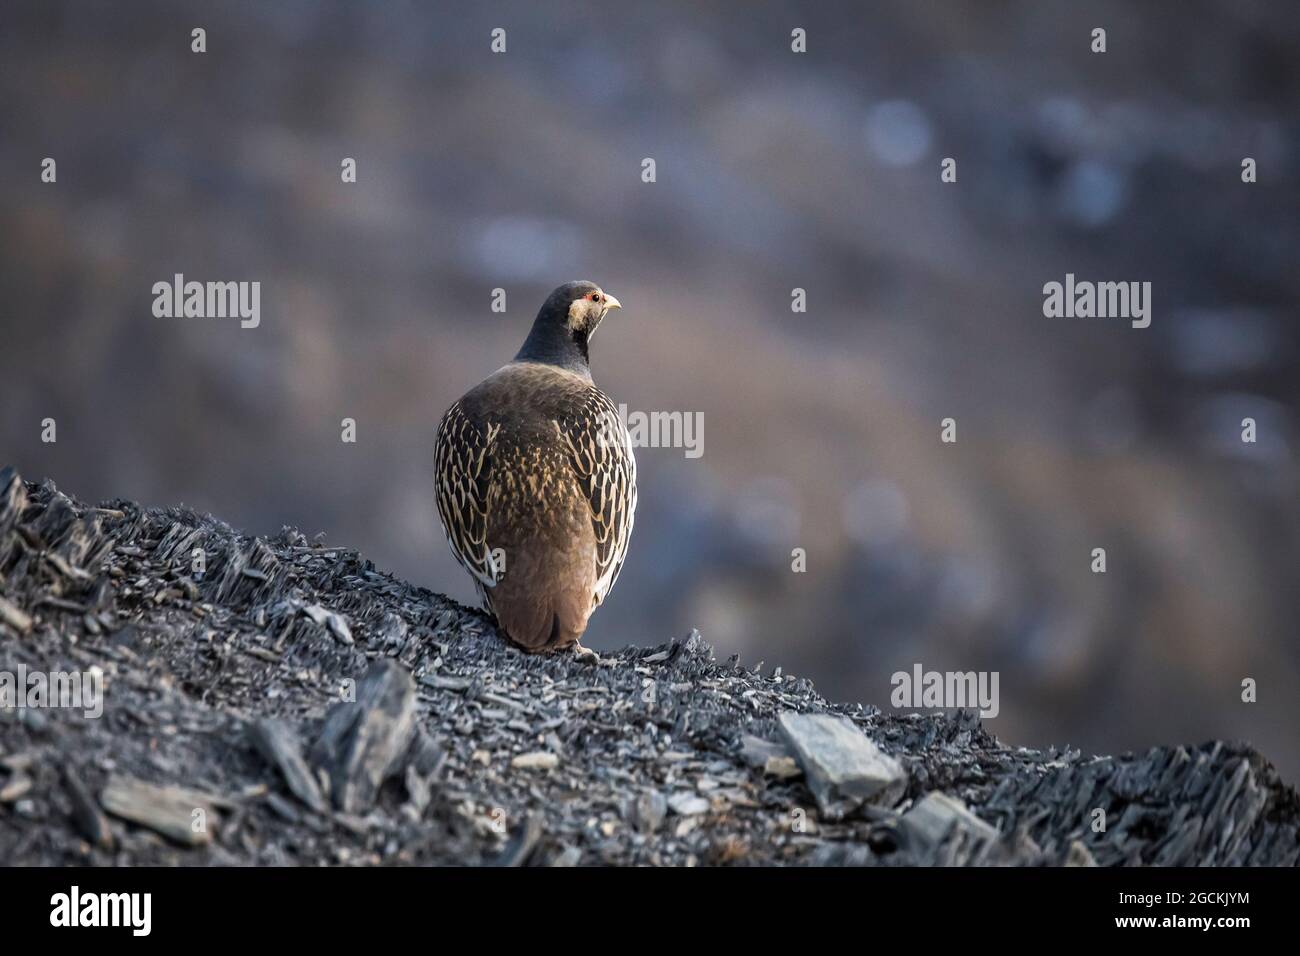 Himalayan snowcock with brown plumage sitting on rough rocky ground in highlands in Nepal Stock Photo